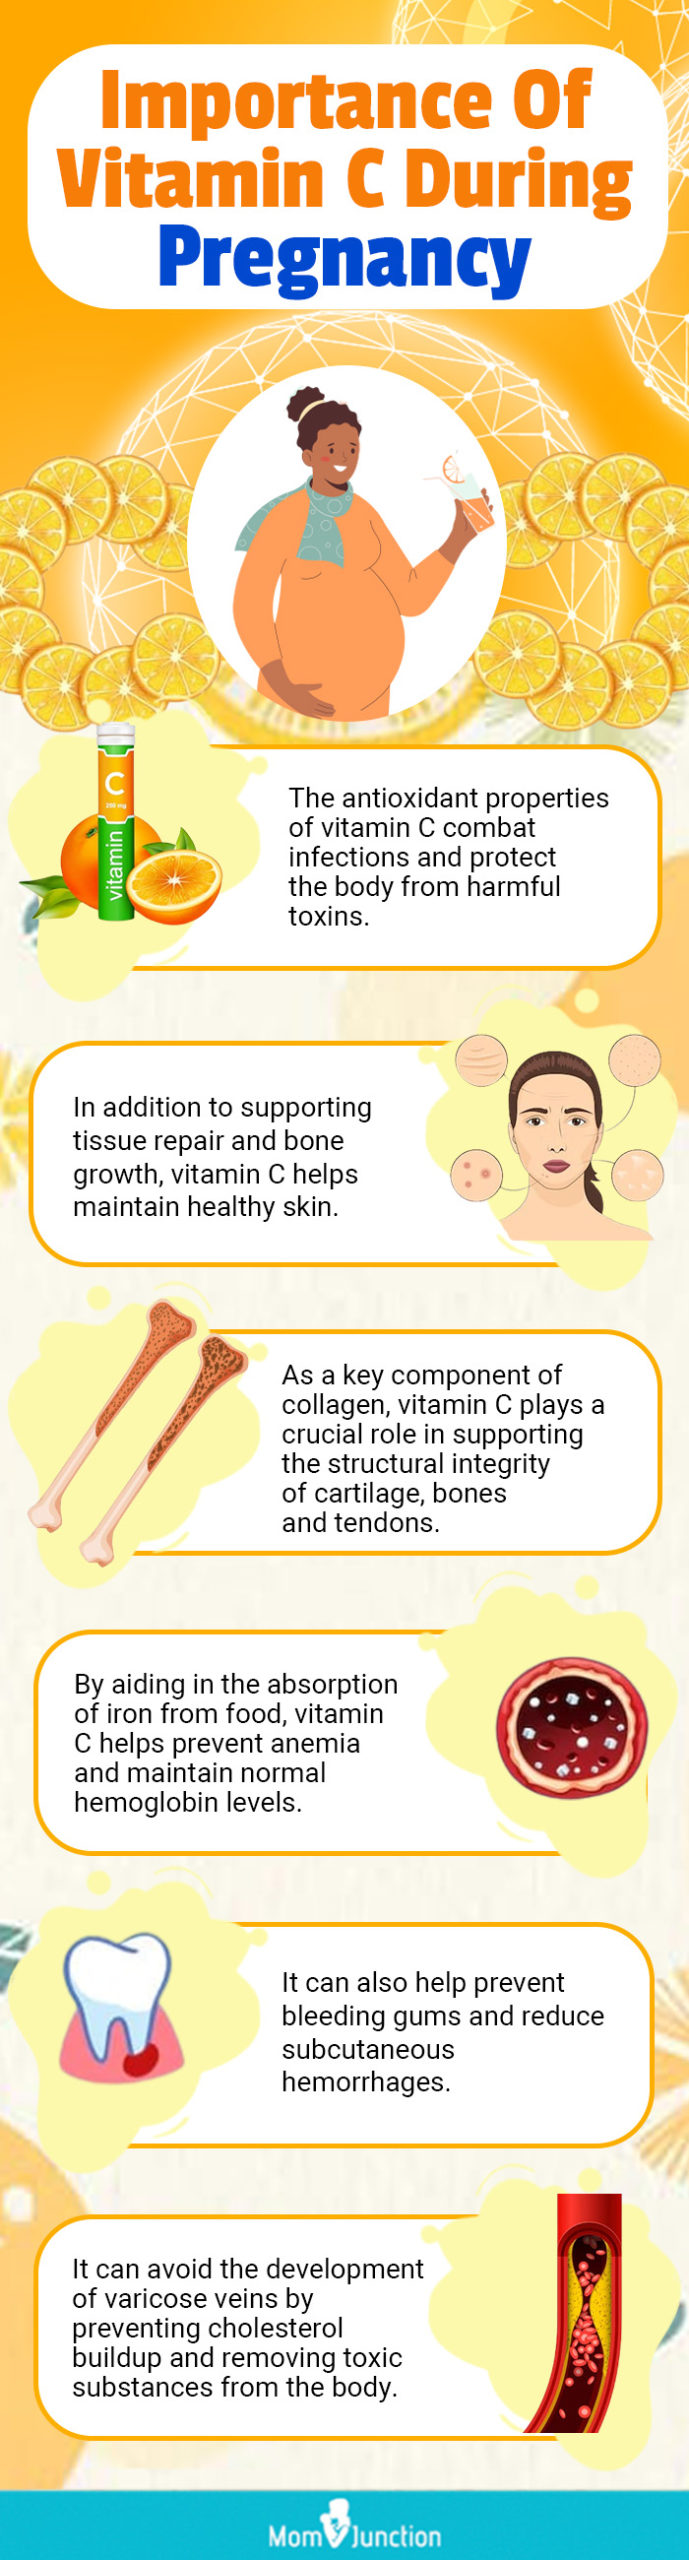 importance of vitamin c during pregancy (infographic)